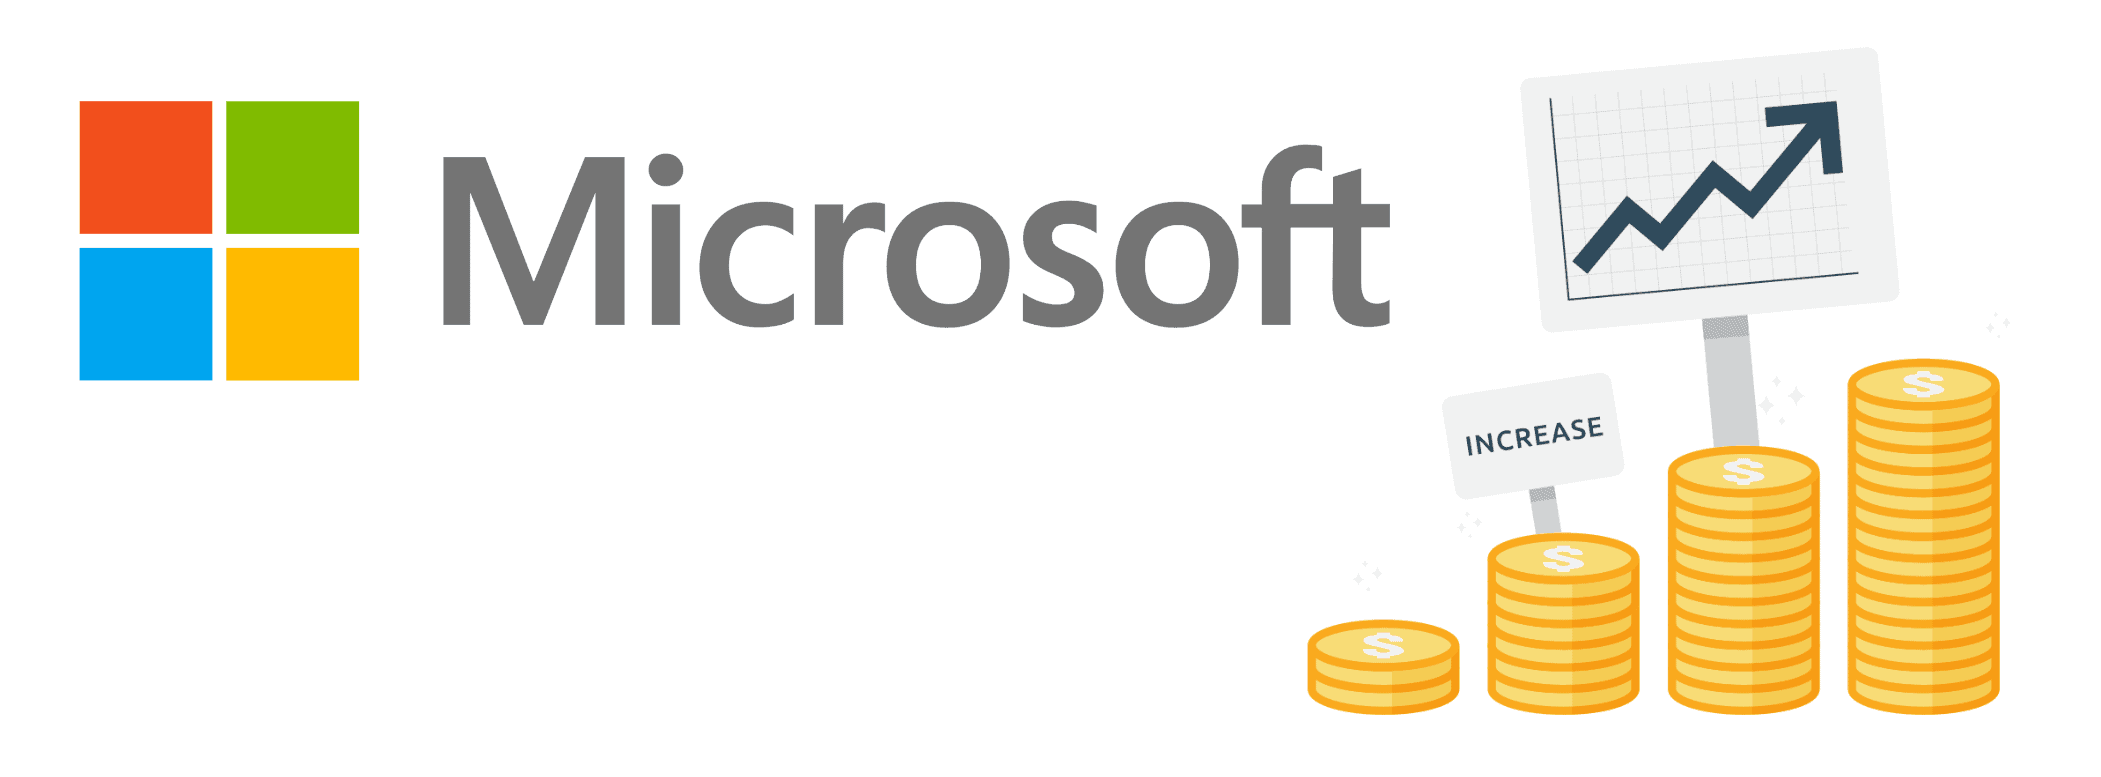 Microsoft Unified Price Continues to Increase